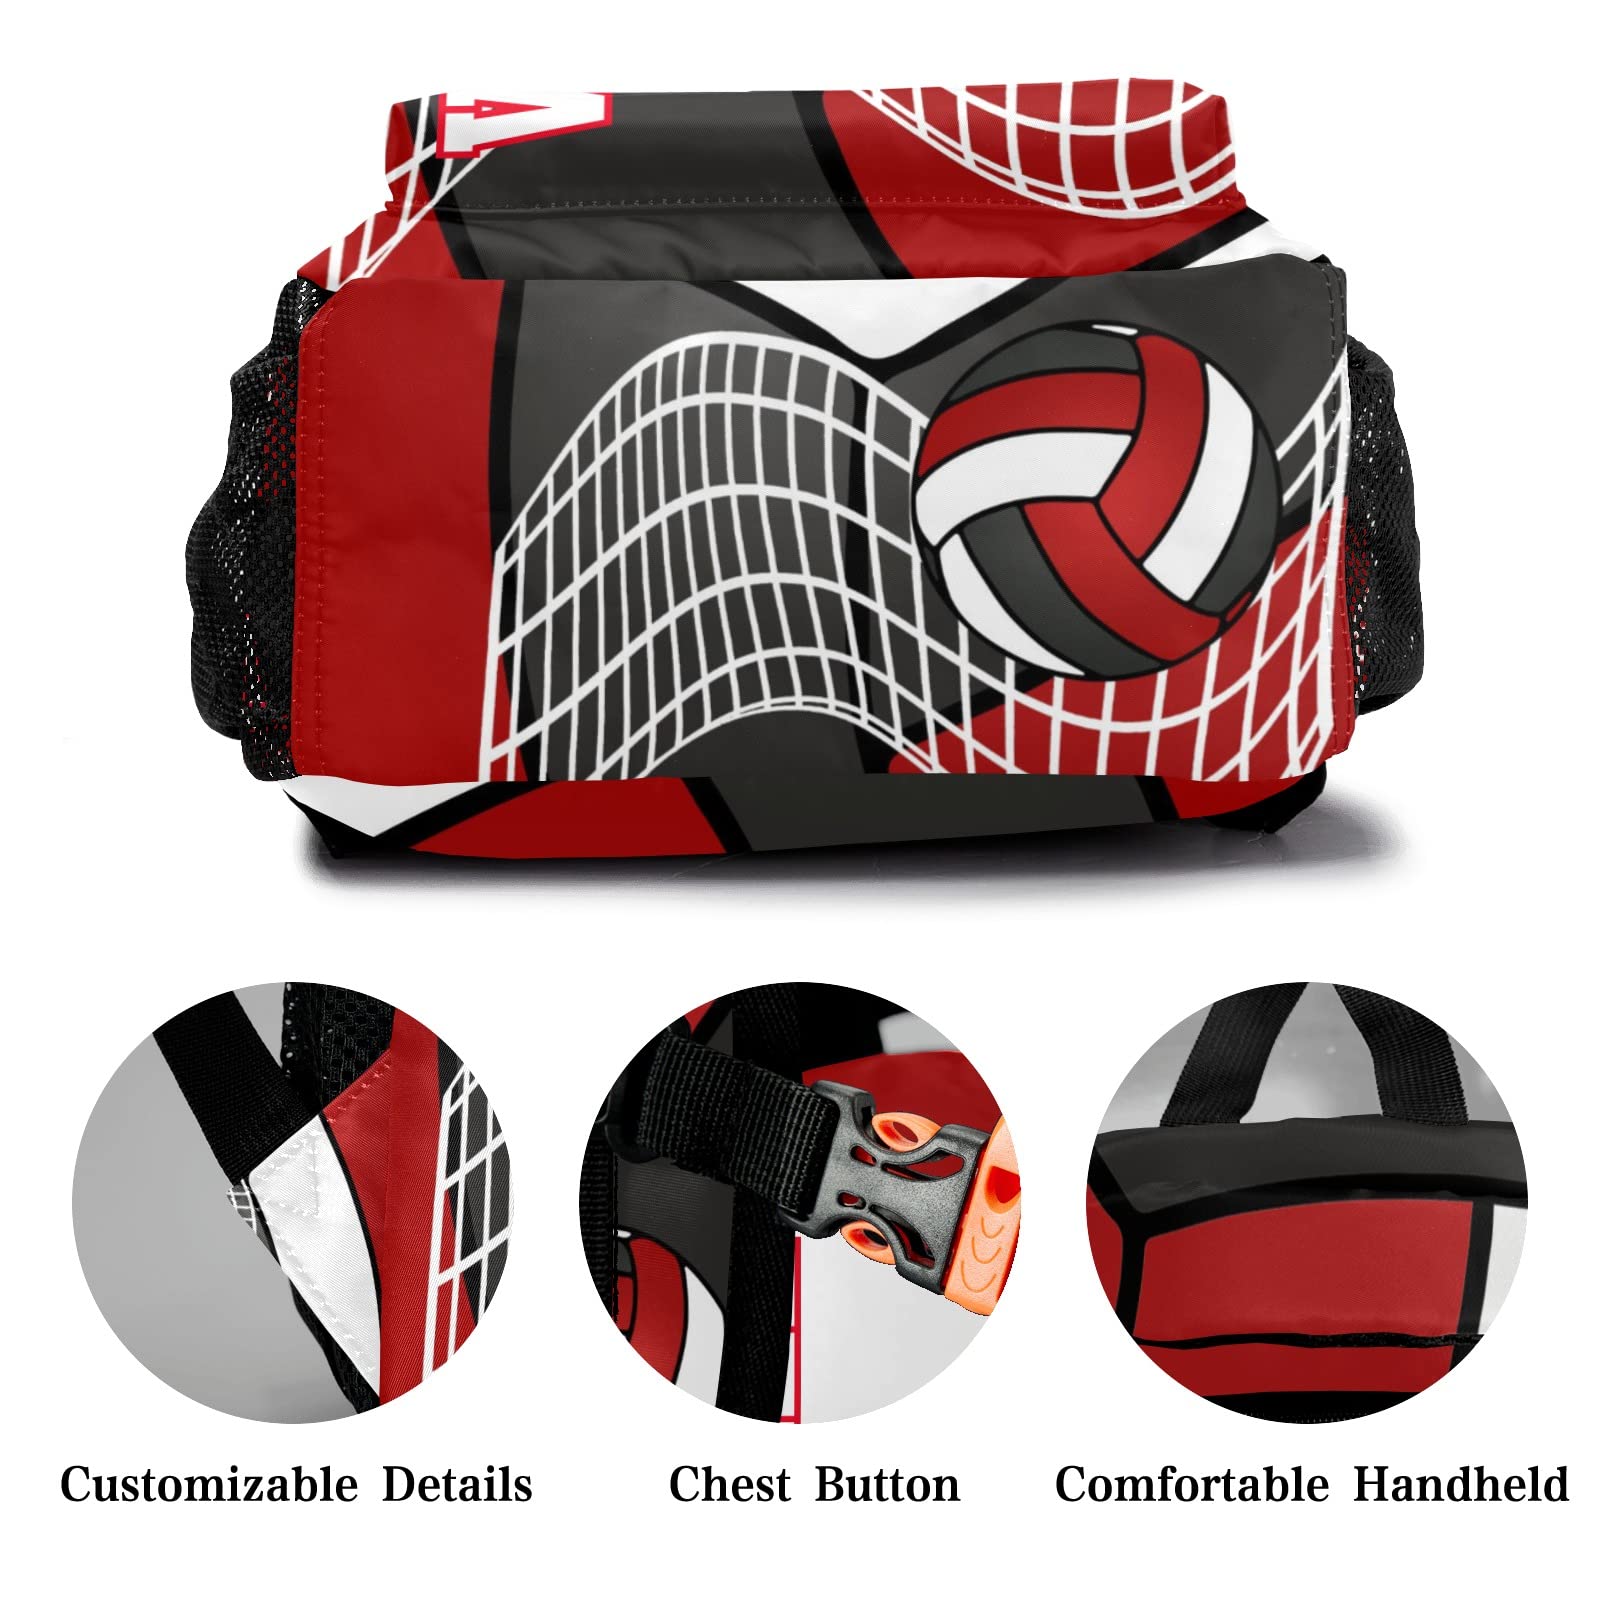 Zaaprint Customized Volleyball White Red Black Waterproof Backpack with Name for Hiking Camping Picnic